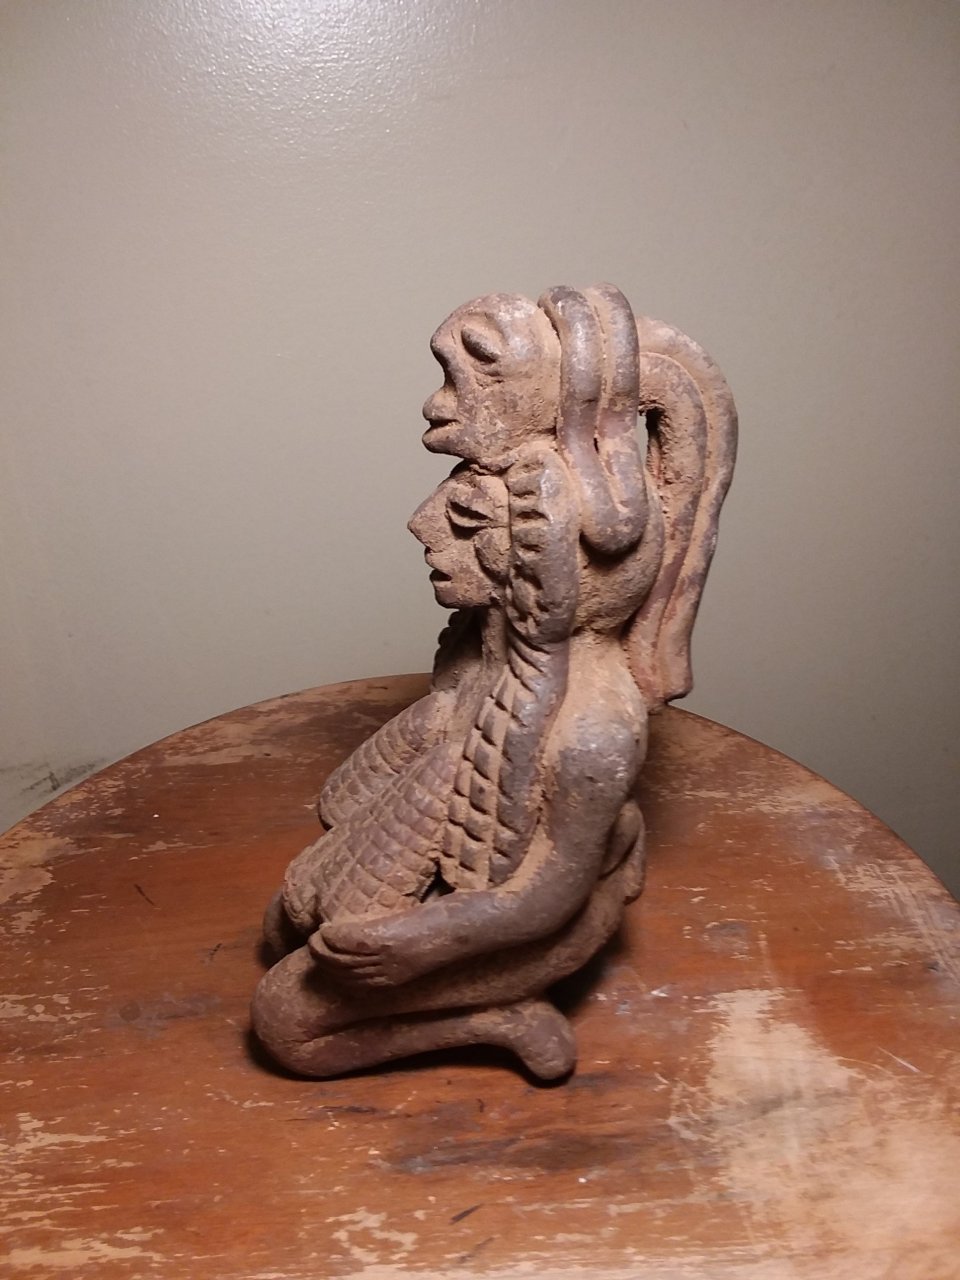 Aztec Maize Goddess, How Old, Made Of What, Can It Be